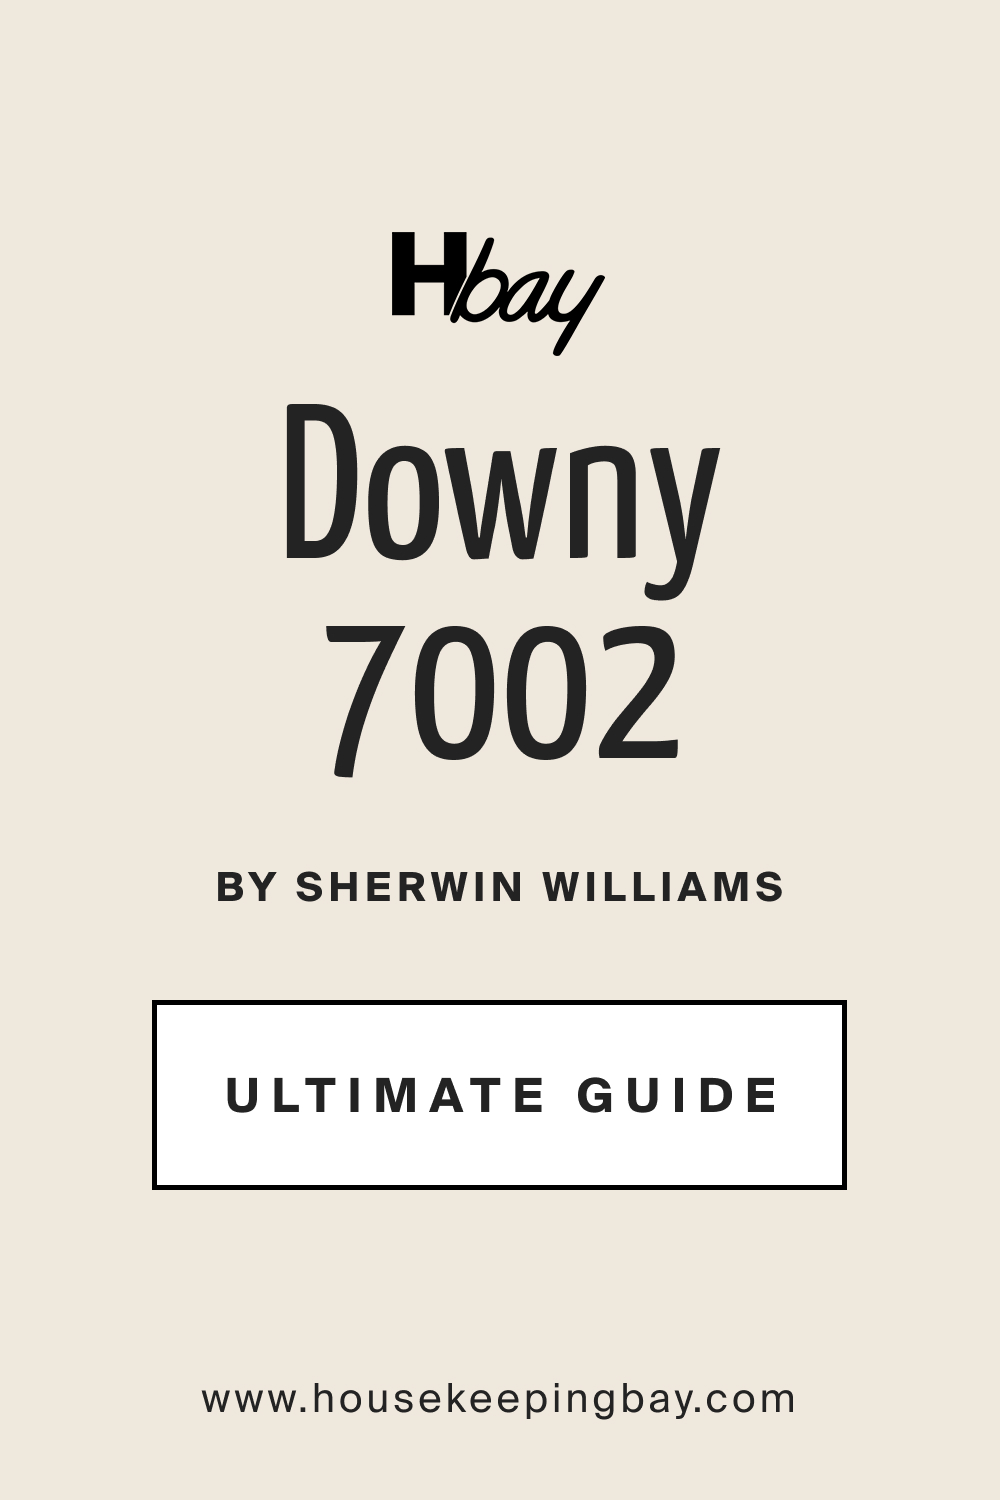 Downy SW 7002 by Sherwin Williams Ultimate Guide